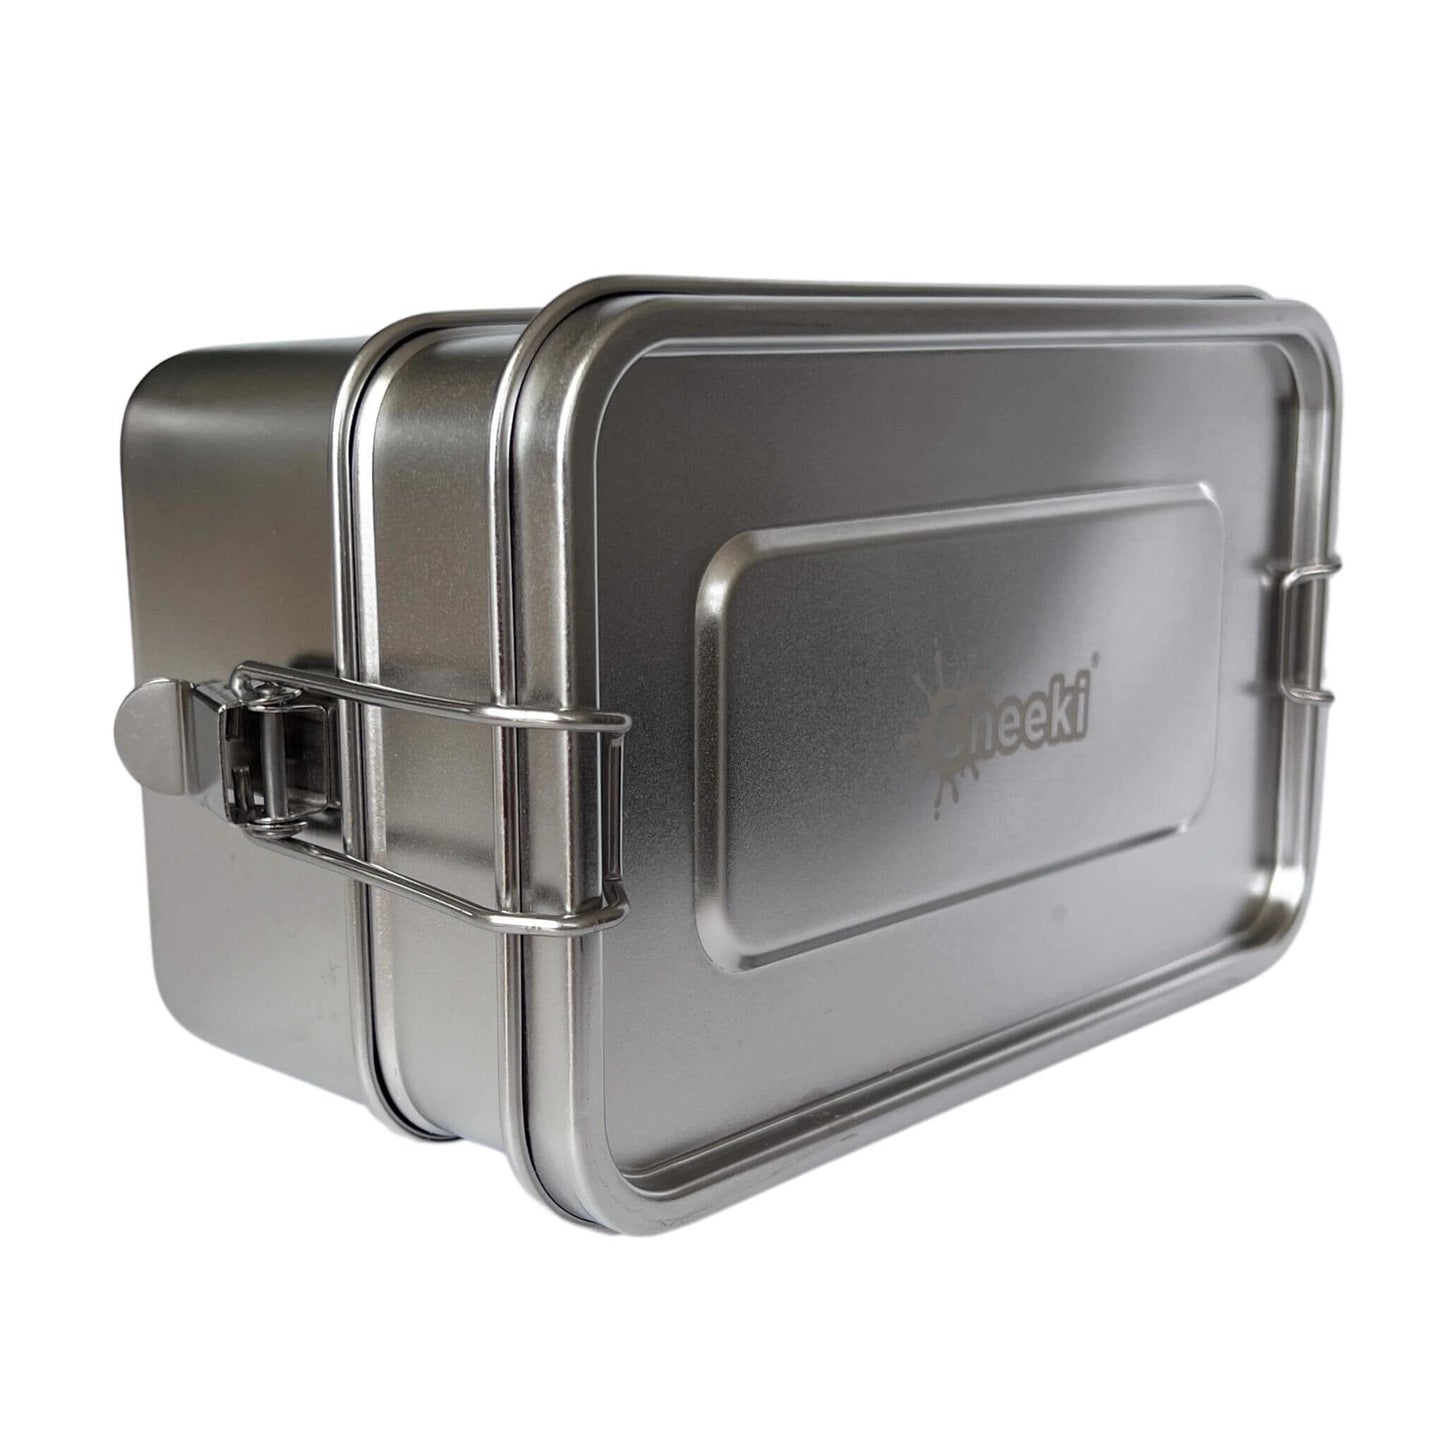 Load image into Gallery viewer, cheeki double stack stainless steel lunchbox on its side
